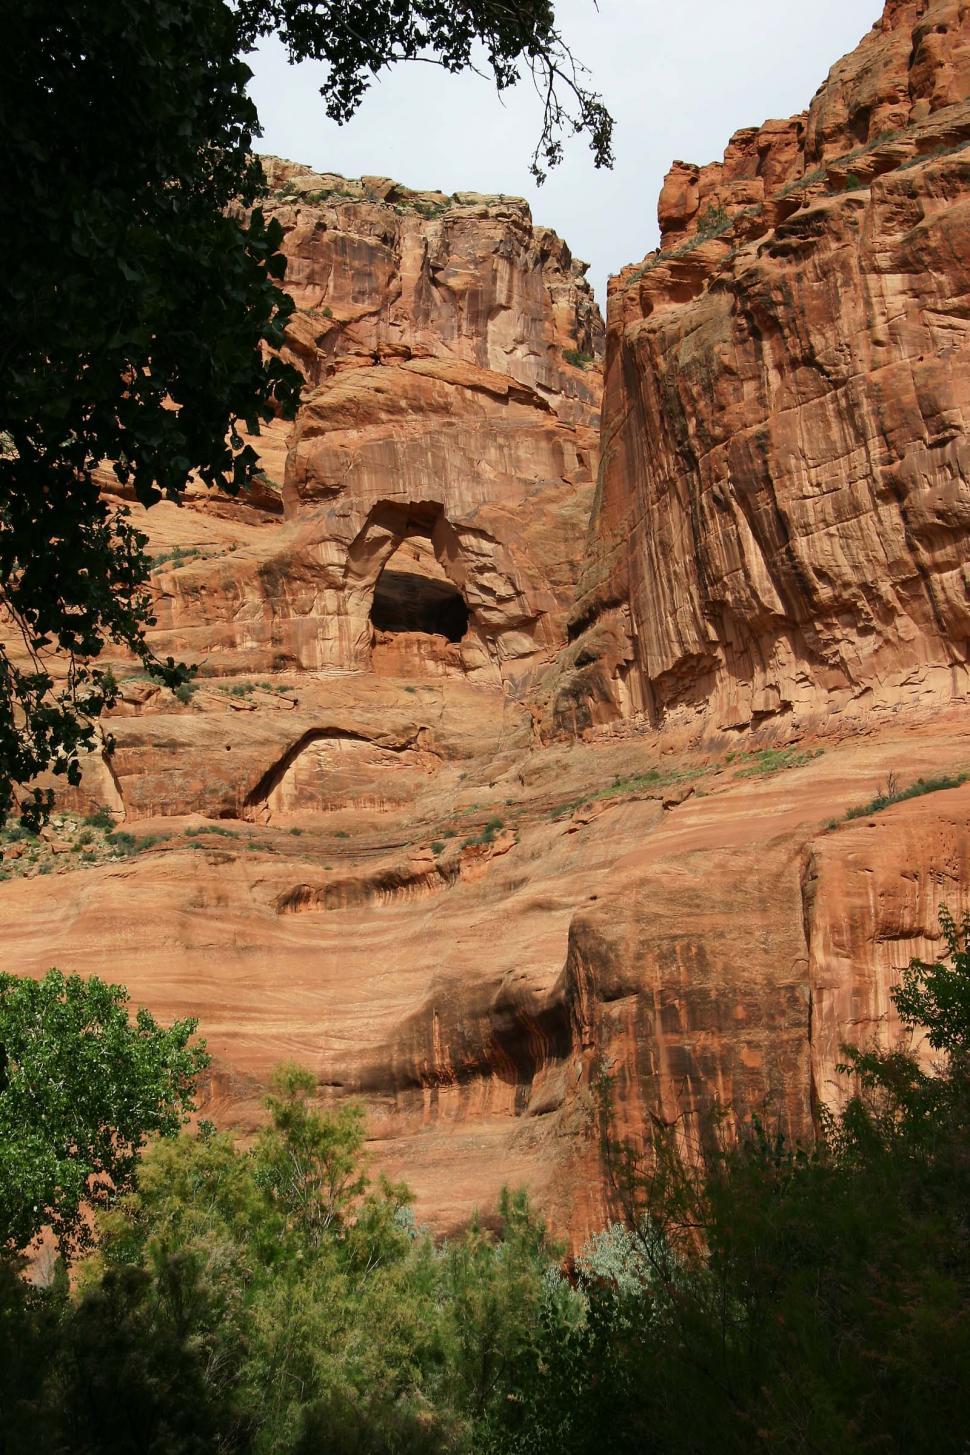 Free Image of Rock Formation With Cave in the Middle 